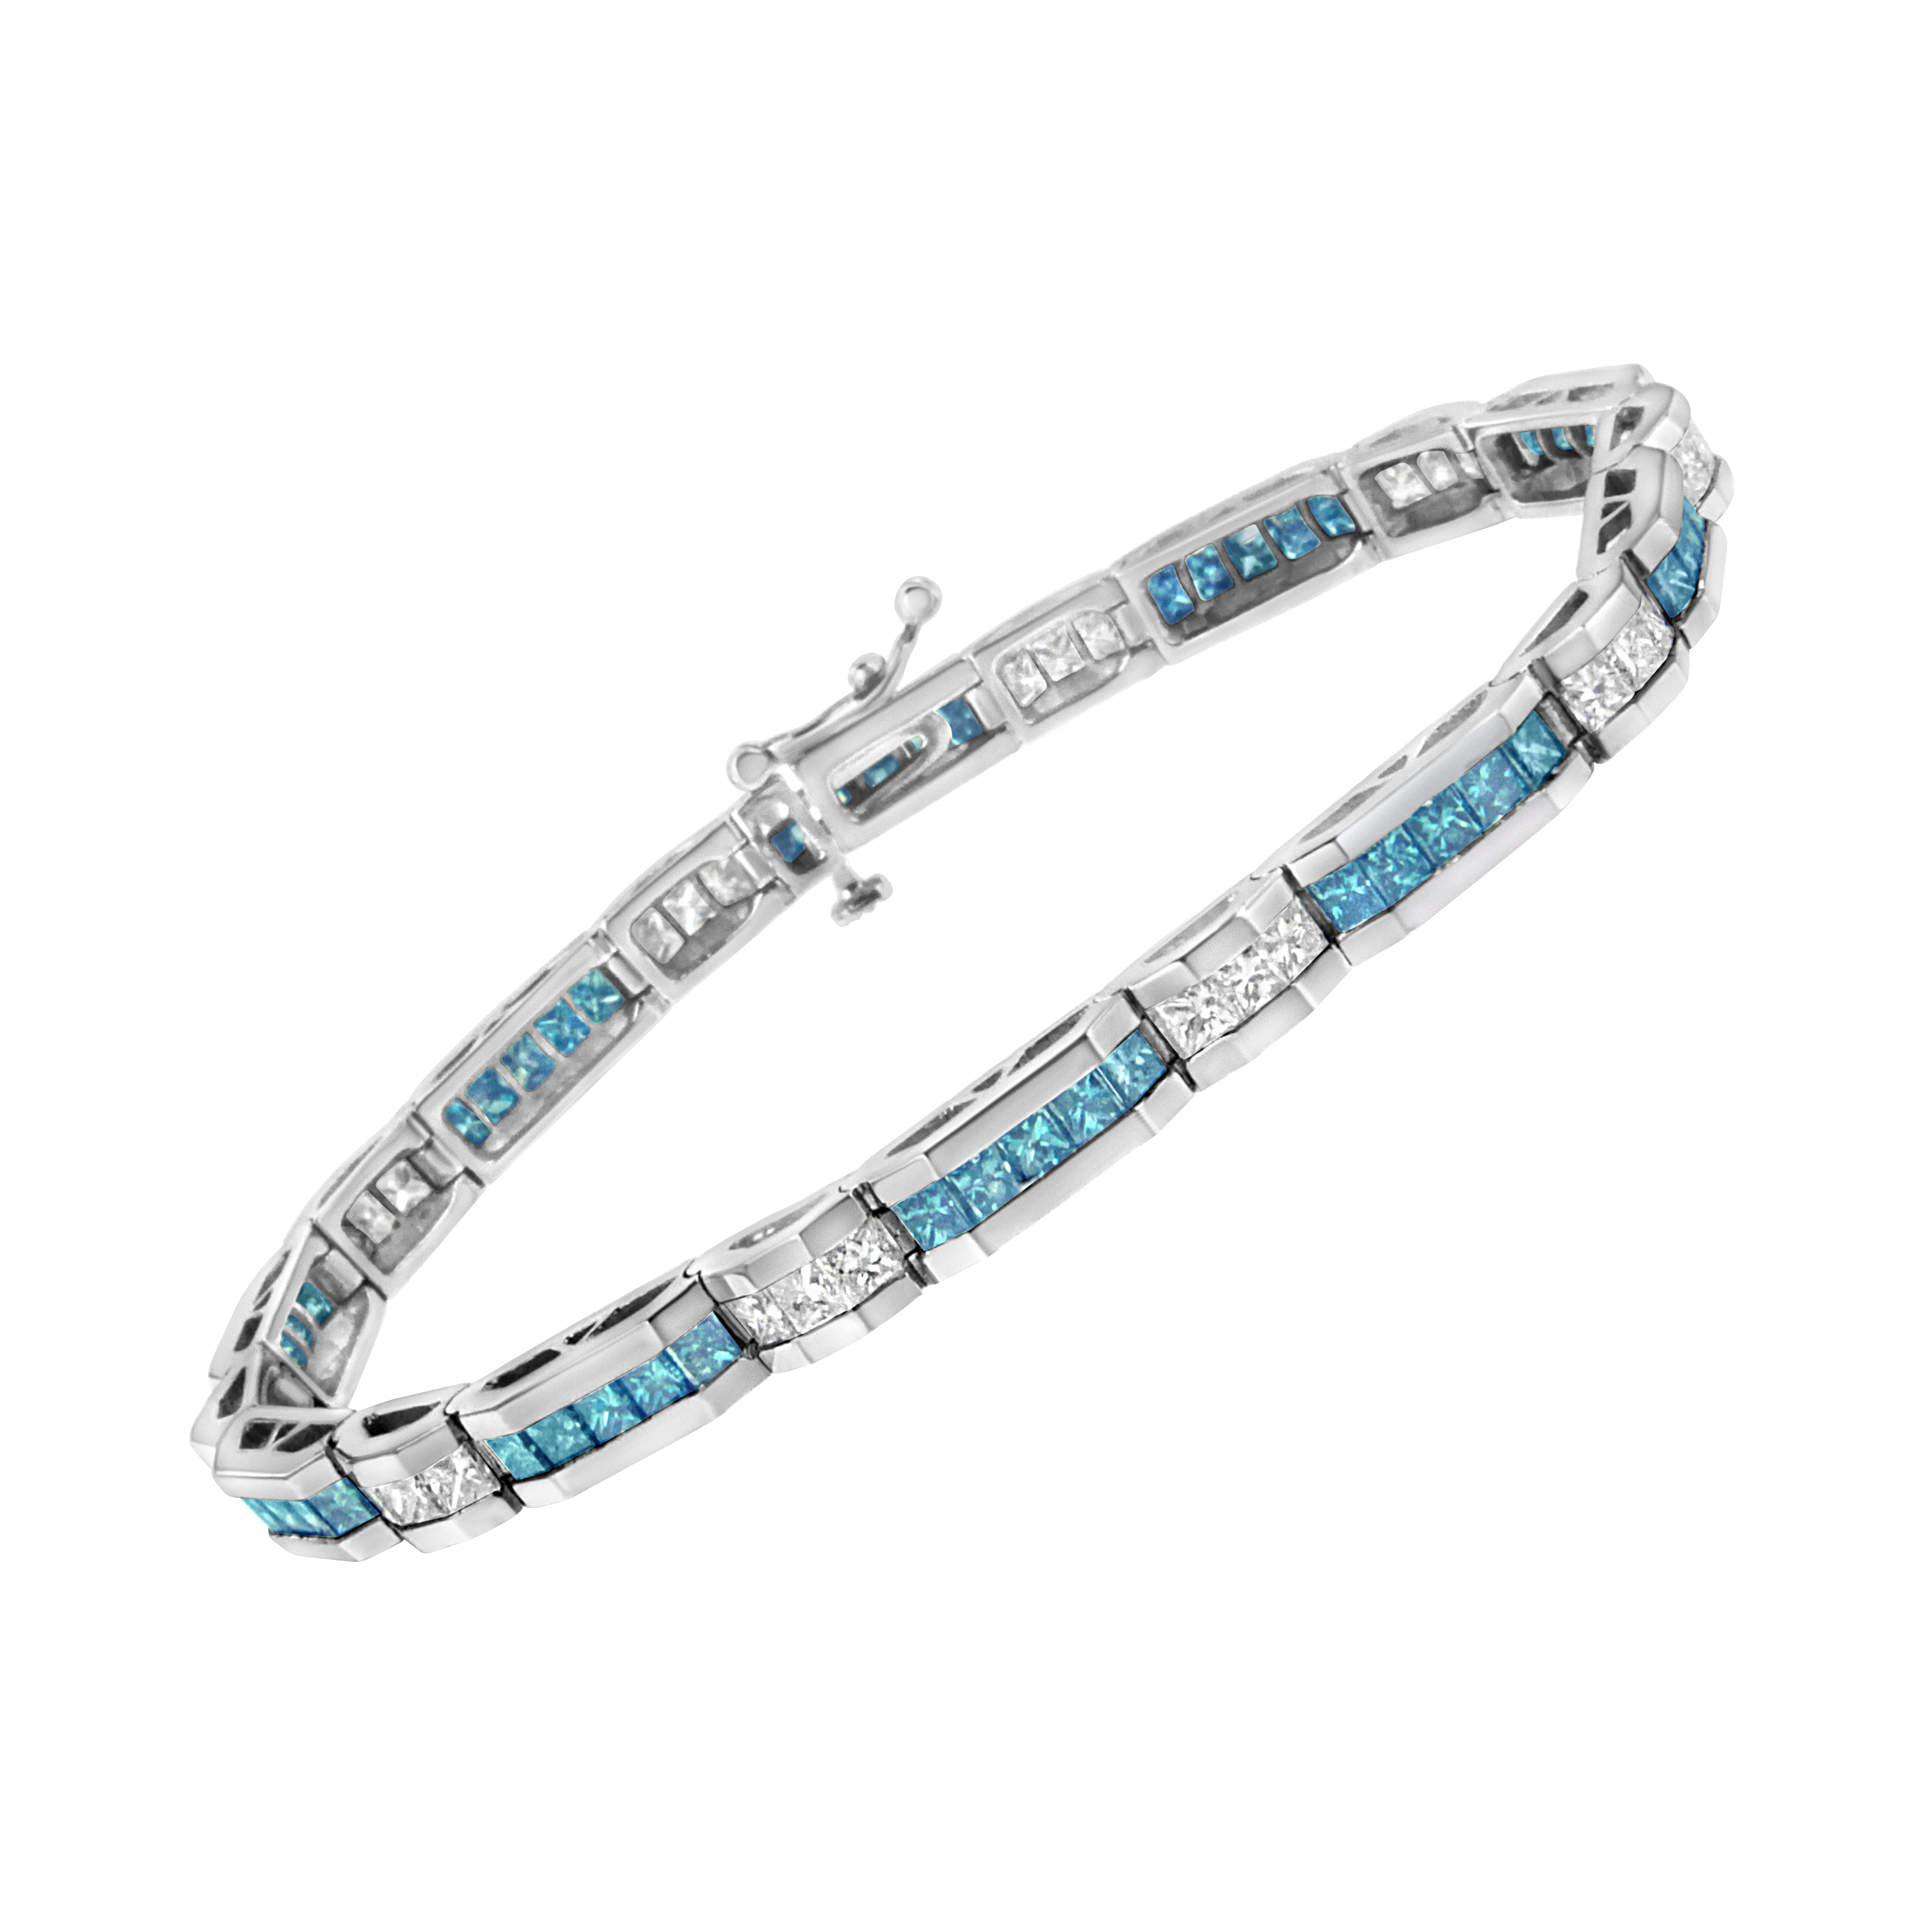 Haus of Brilliance 14K White Gold 6 1/3 Cttw White and Treated Blue Diamond Tennis Bracelet (H-I Color, SI1-SI2 Clarity) - 7.25"